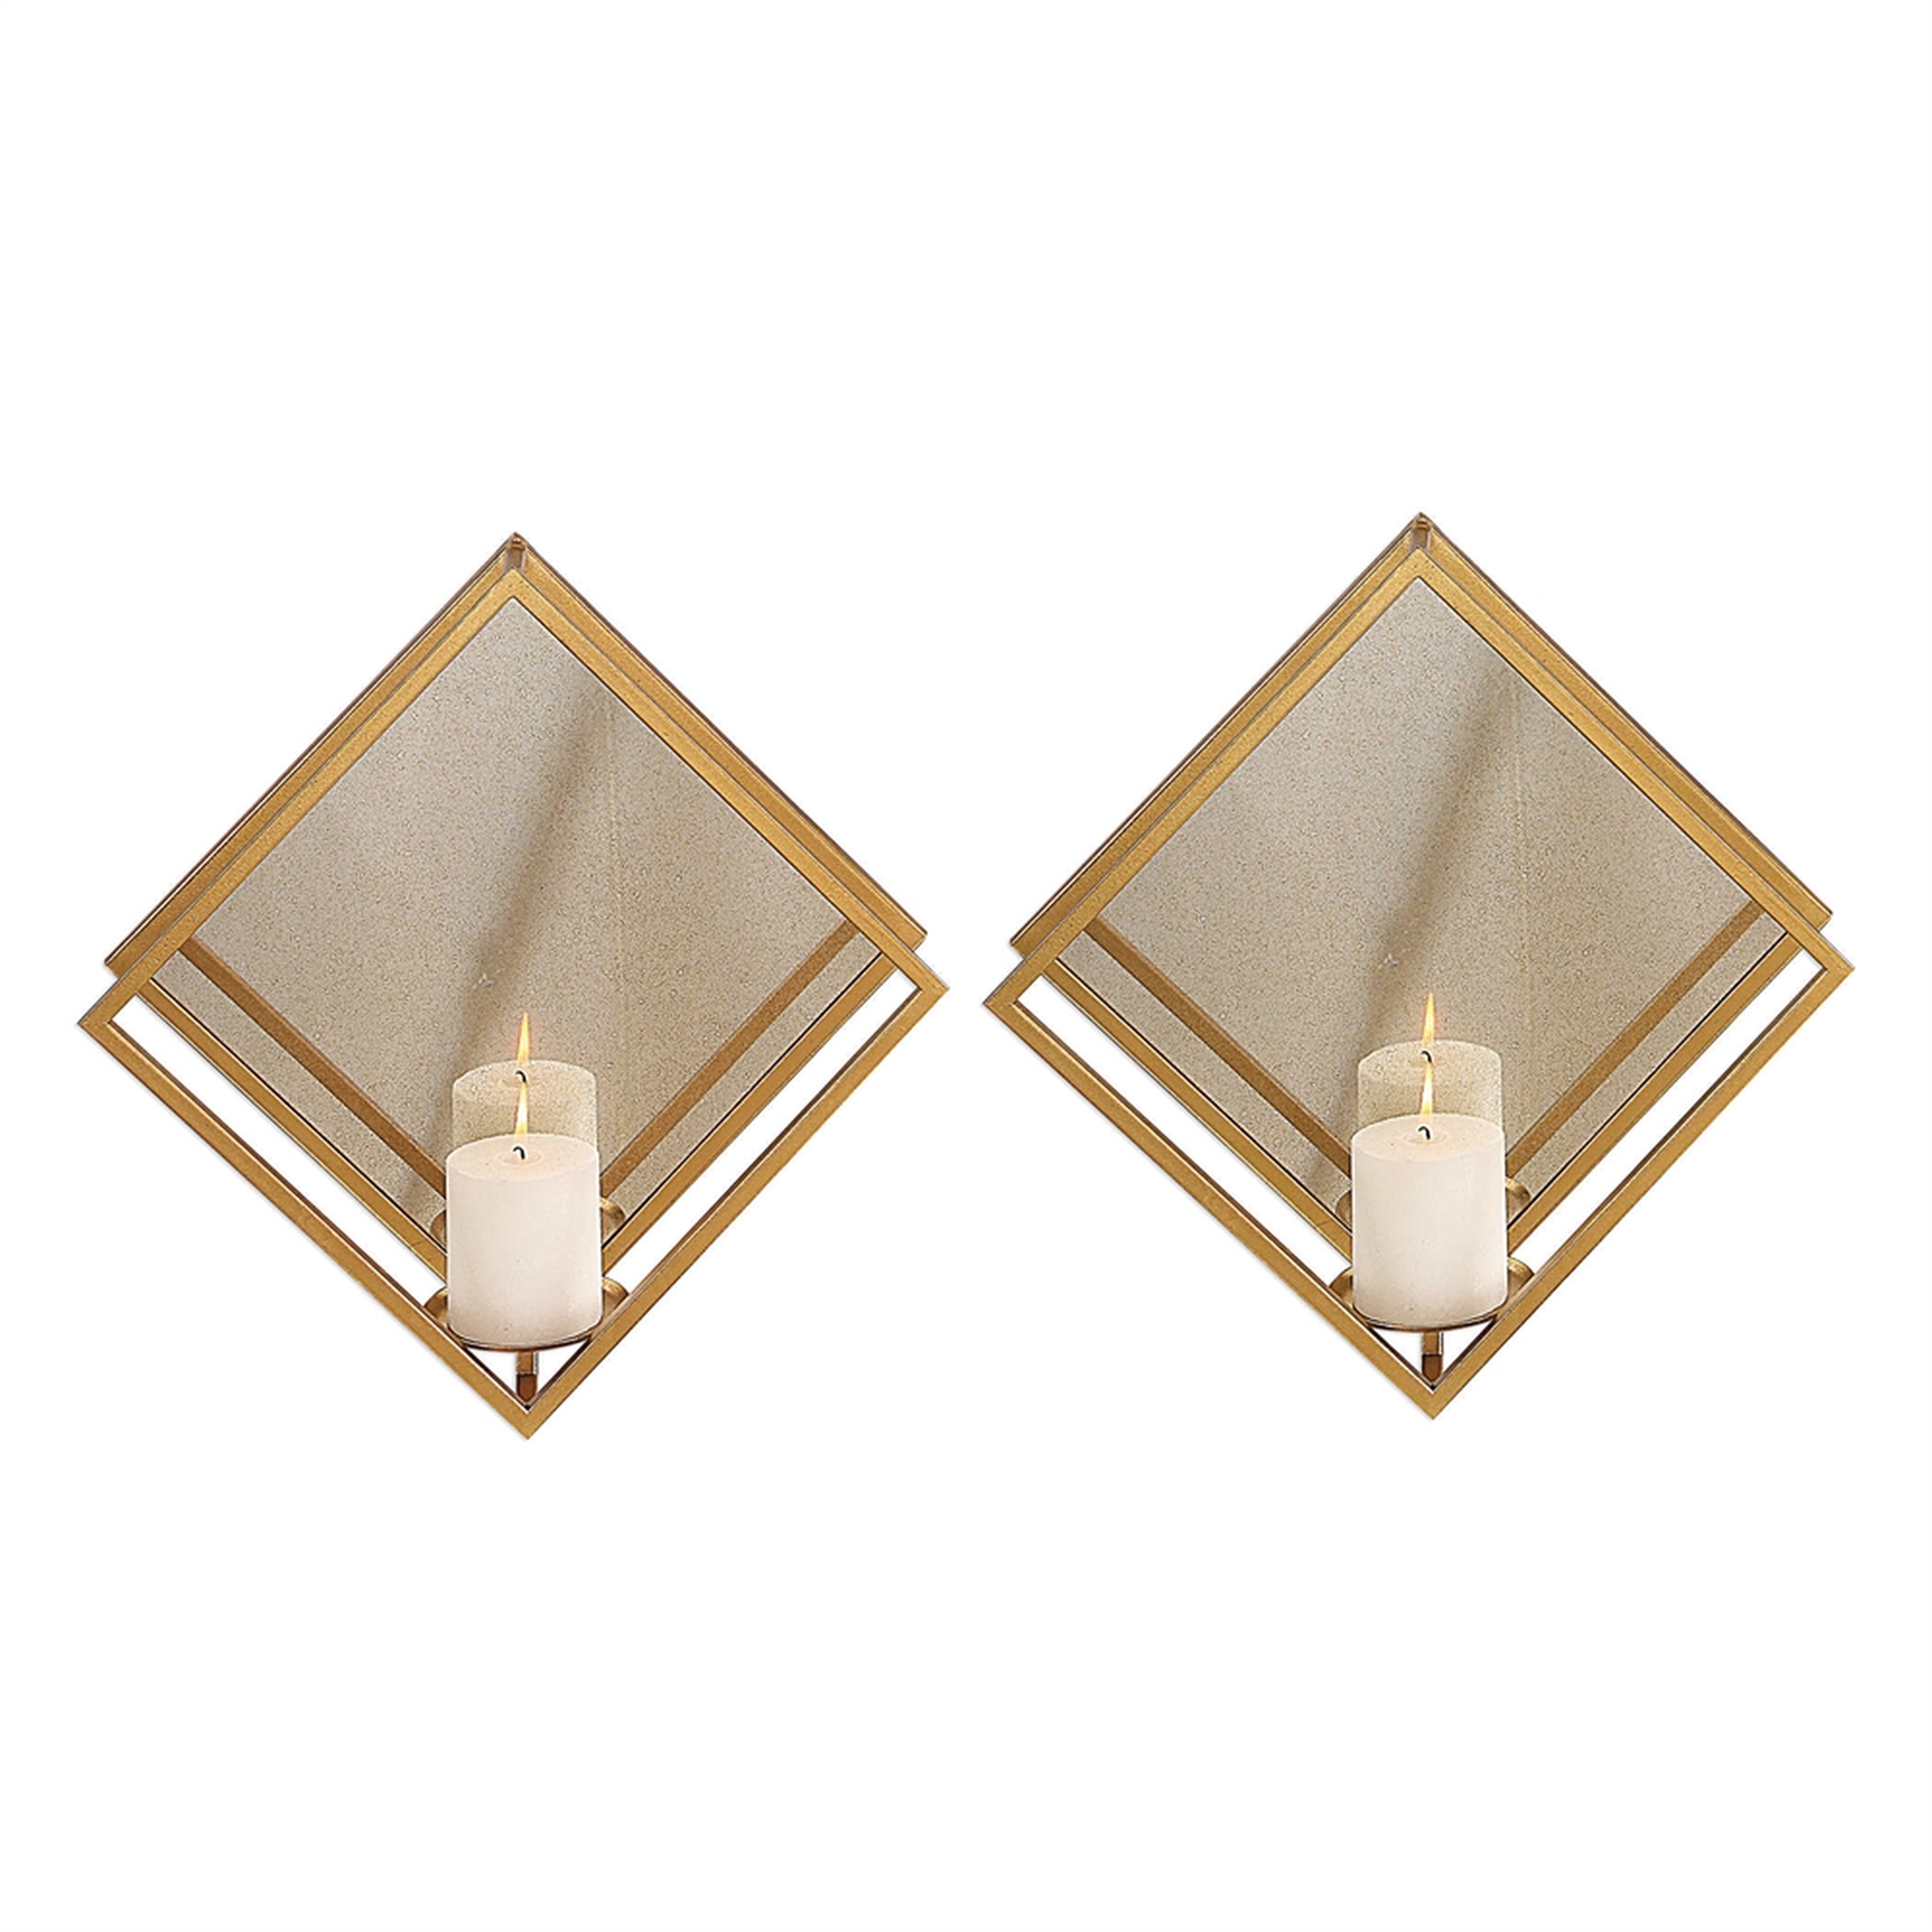 Zulia, Candle Sconce, S/2 - Hudsonhill Foundry